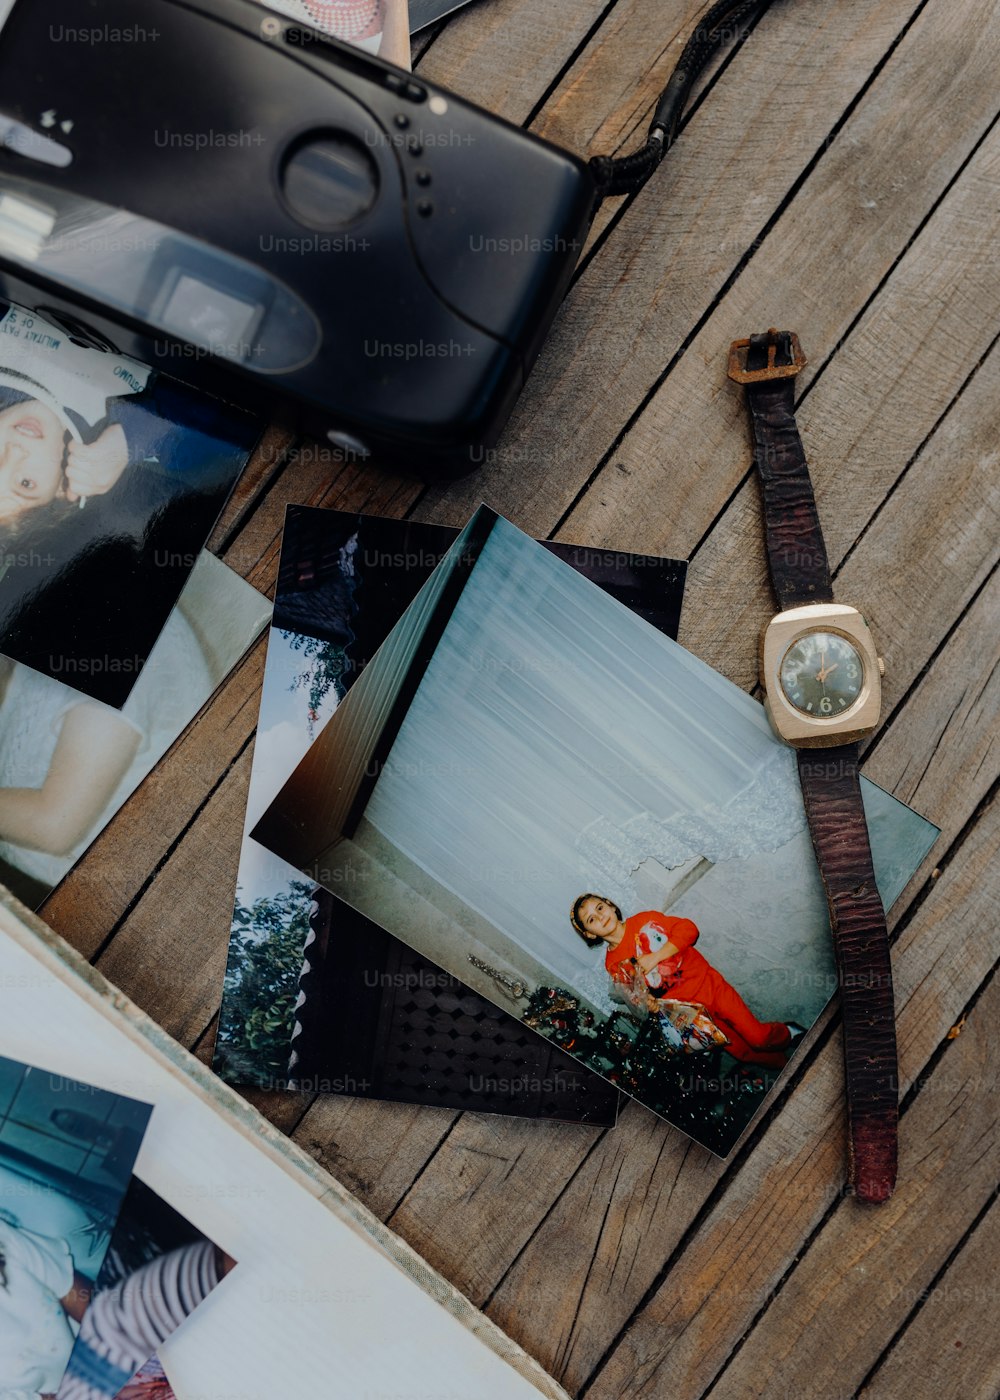 a wooden table topped with photos and a watch